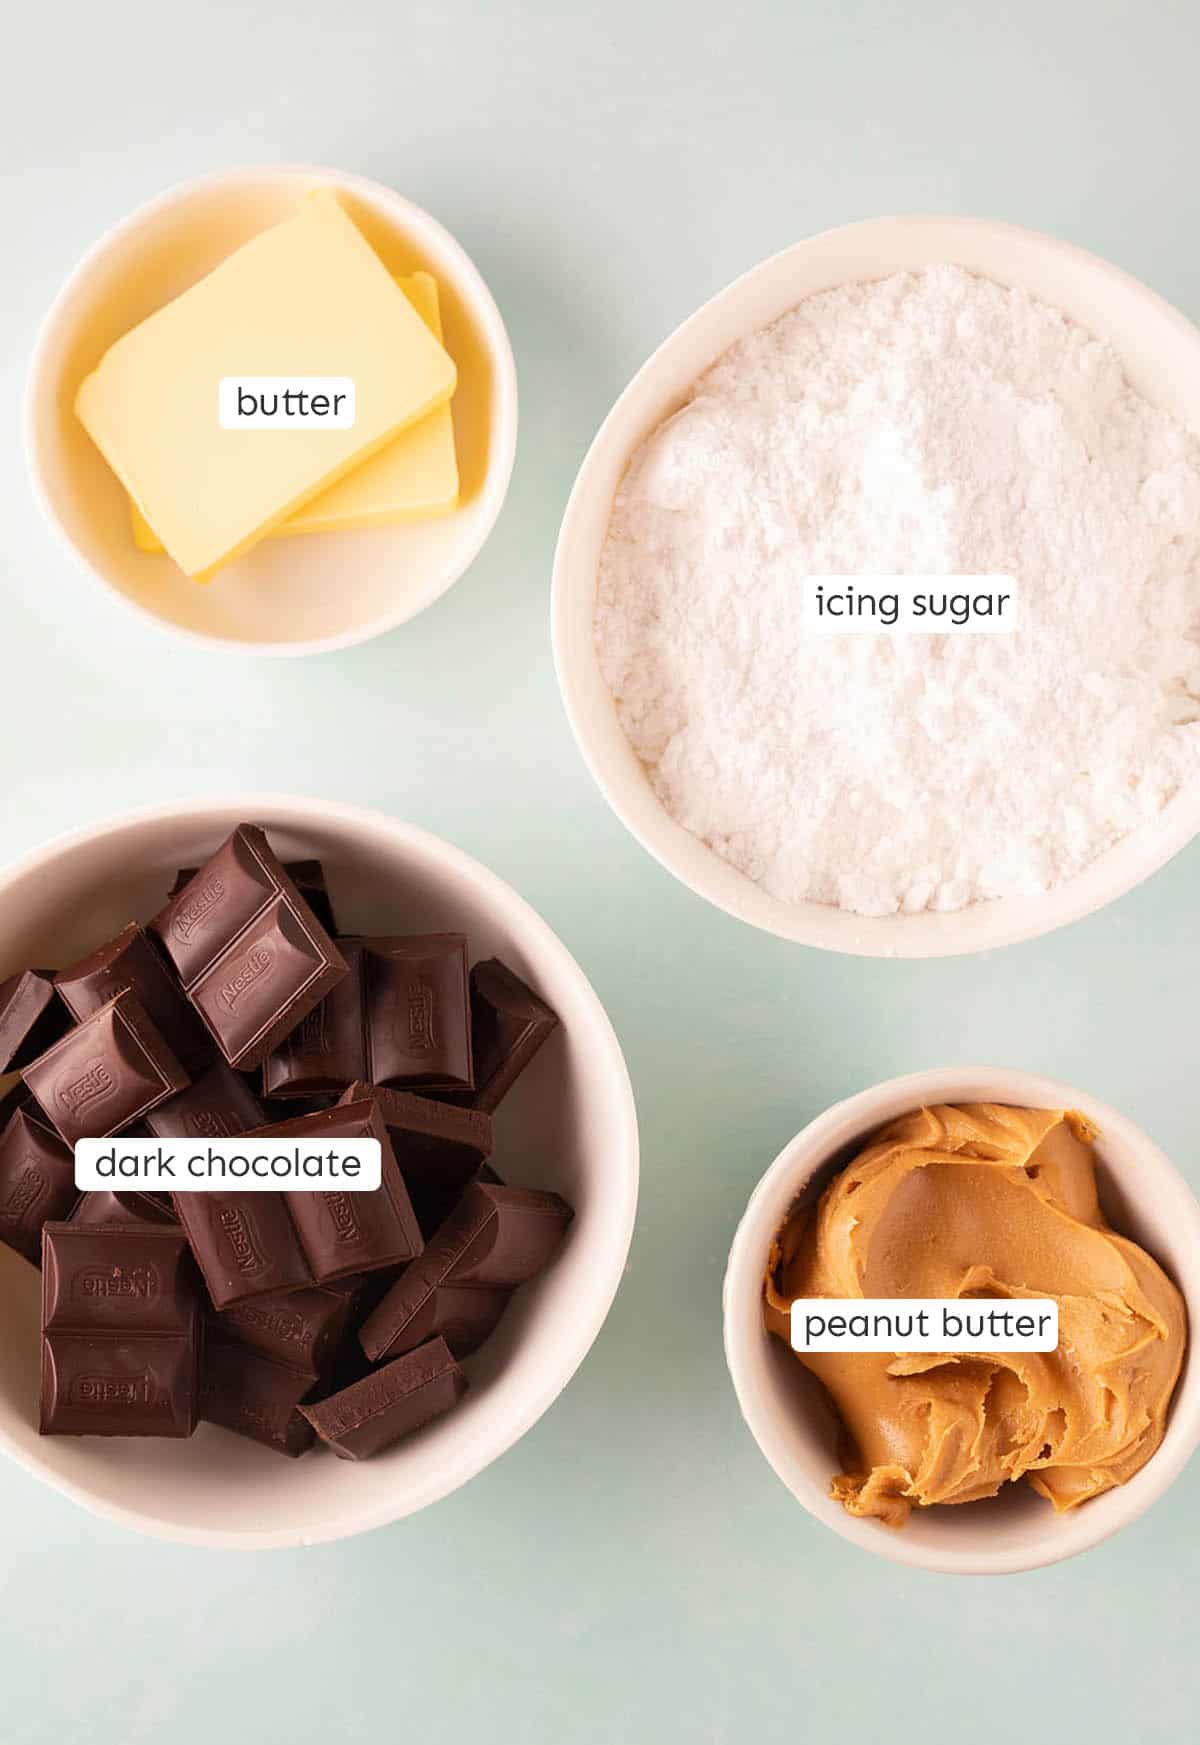 All the ingredients needed to make Peanut Butter Balls from scratch.